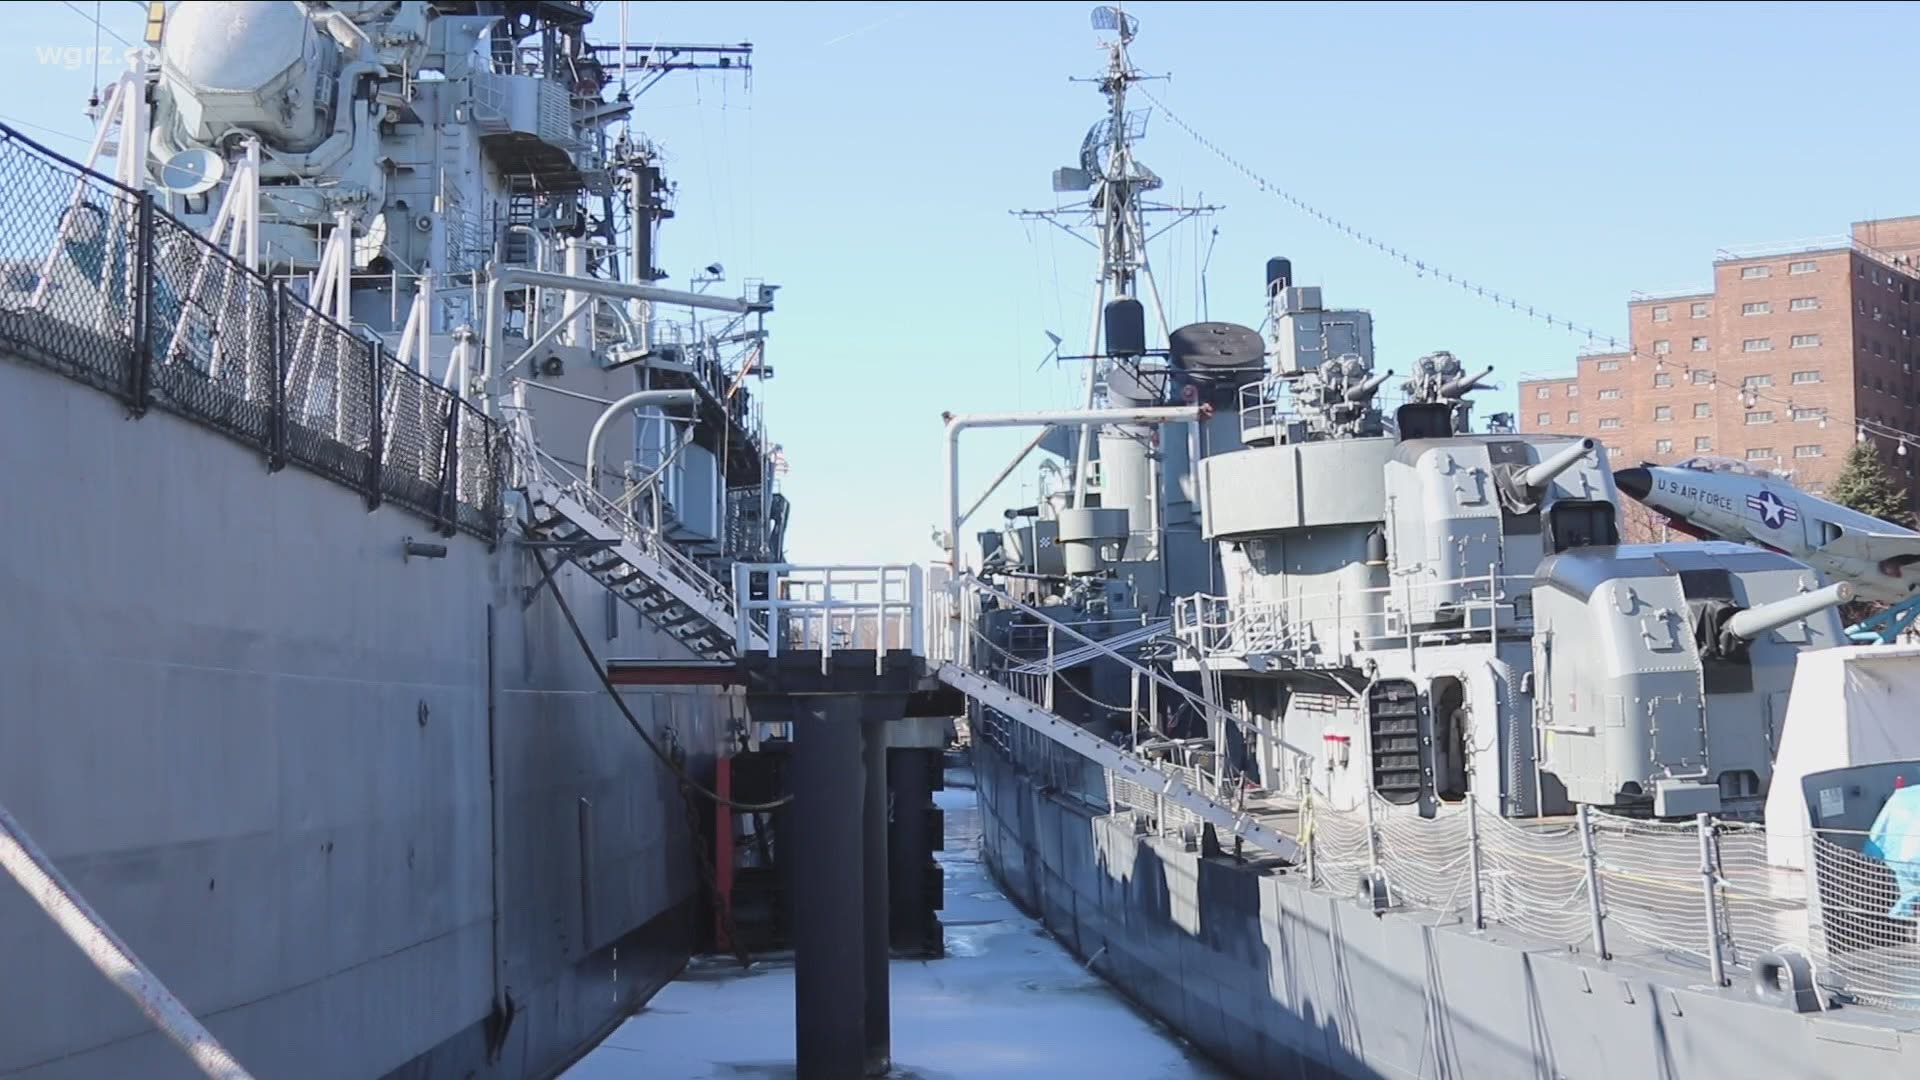 It's only been four days since we first told you about the help our naval park needed to save the USS The Sullivans, and already Western New York has stepped up.